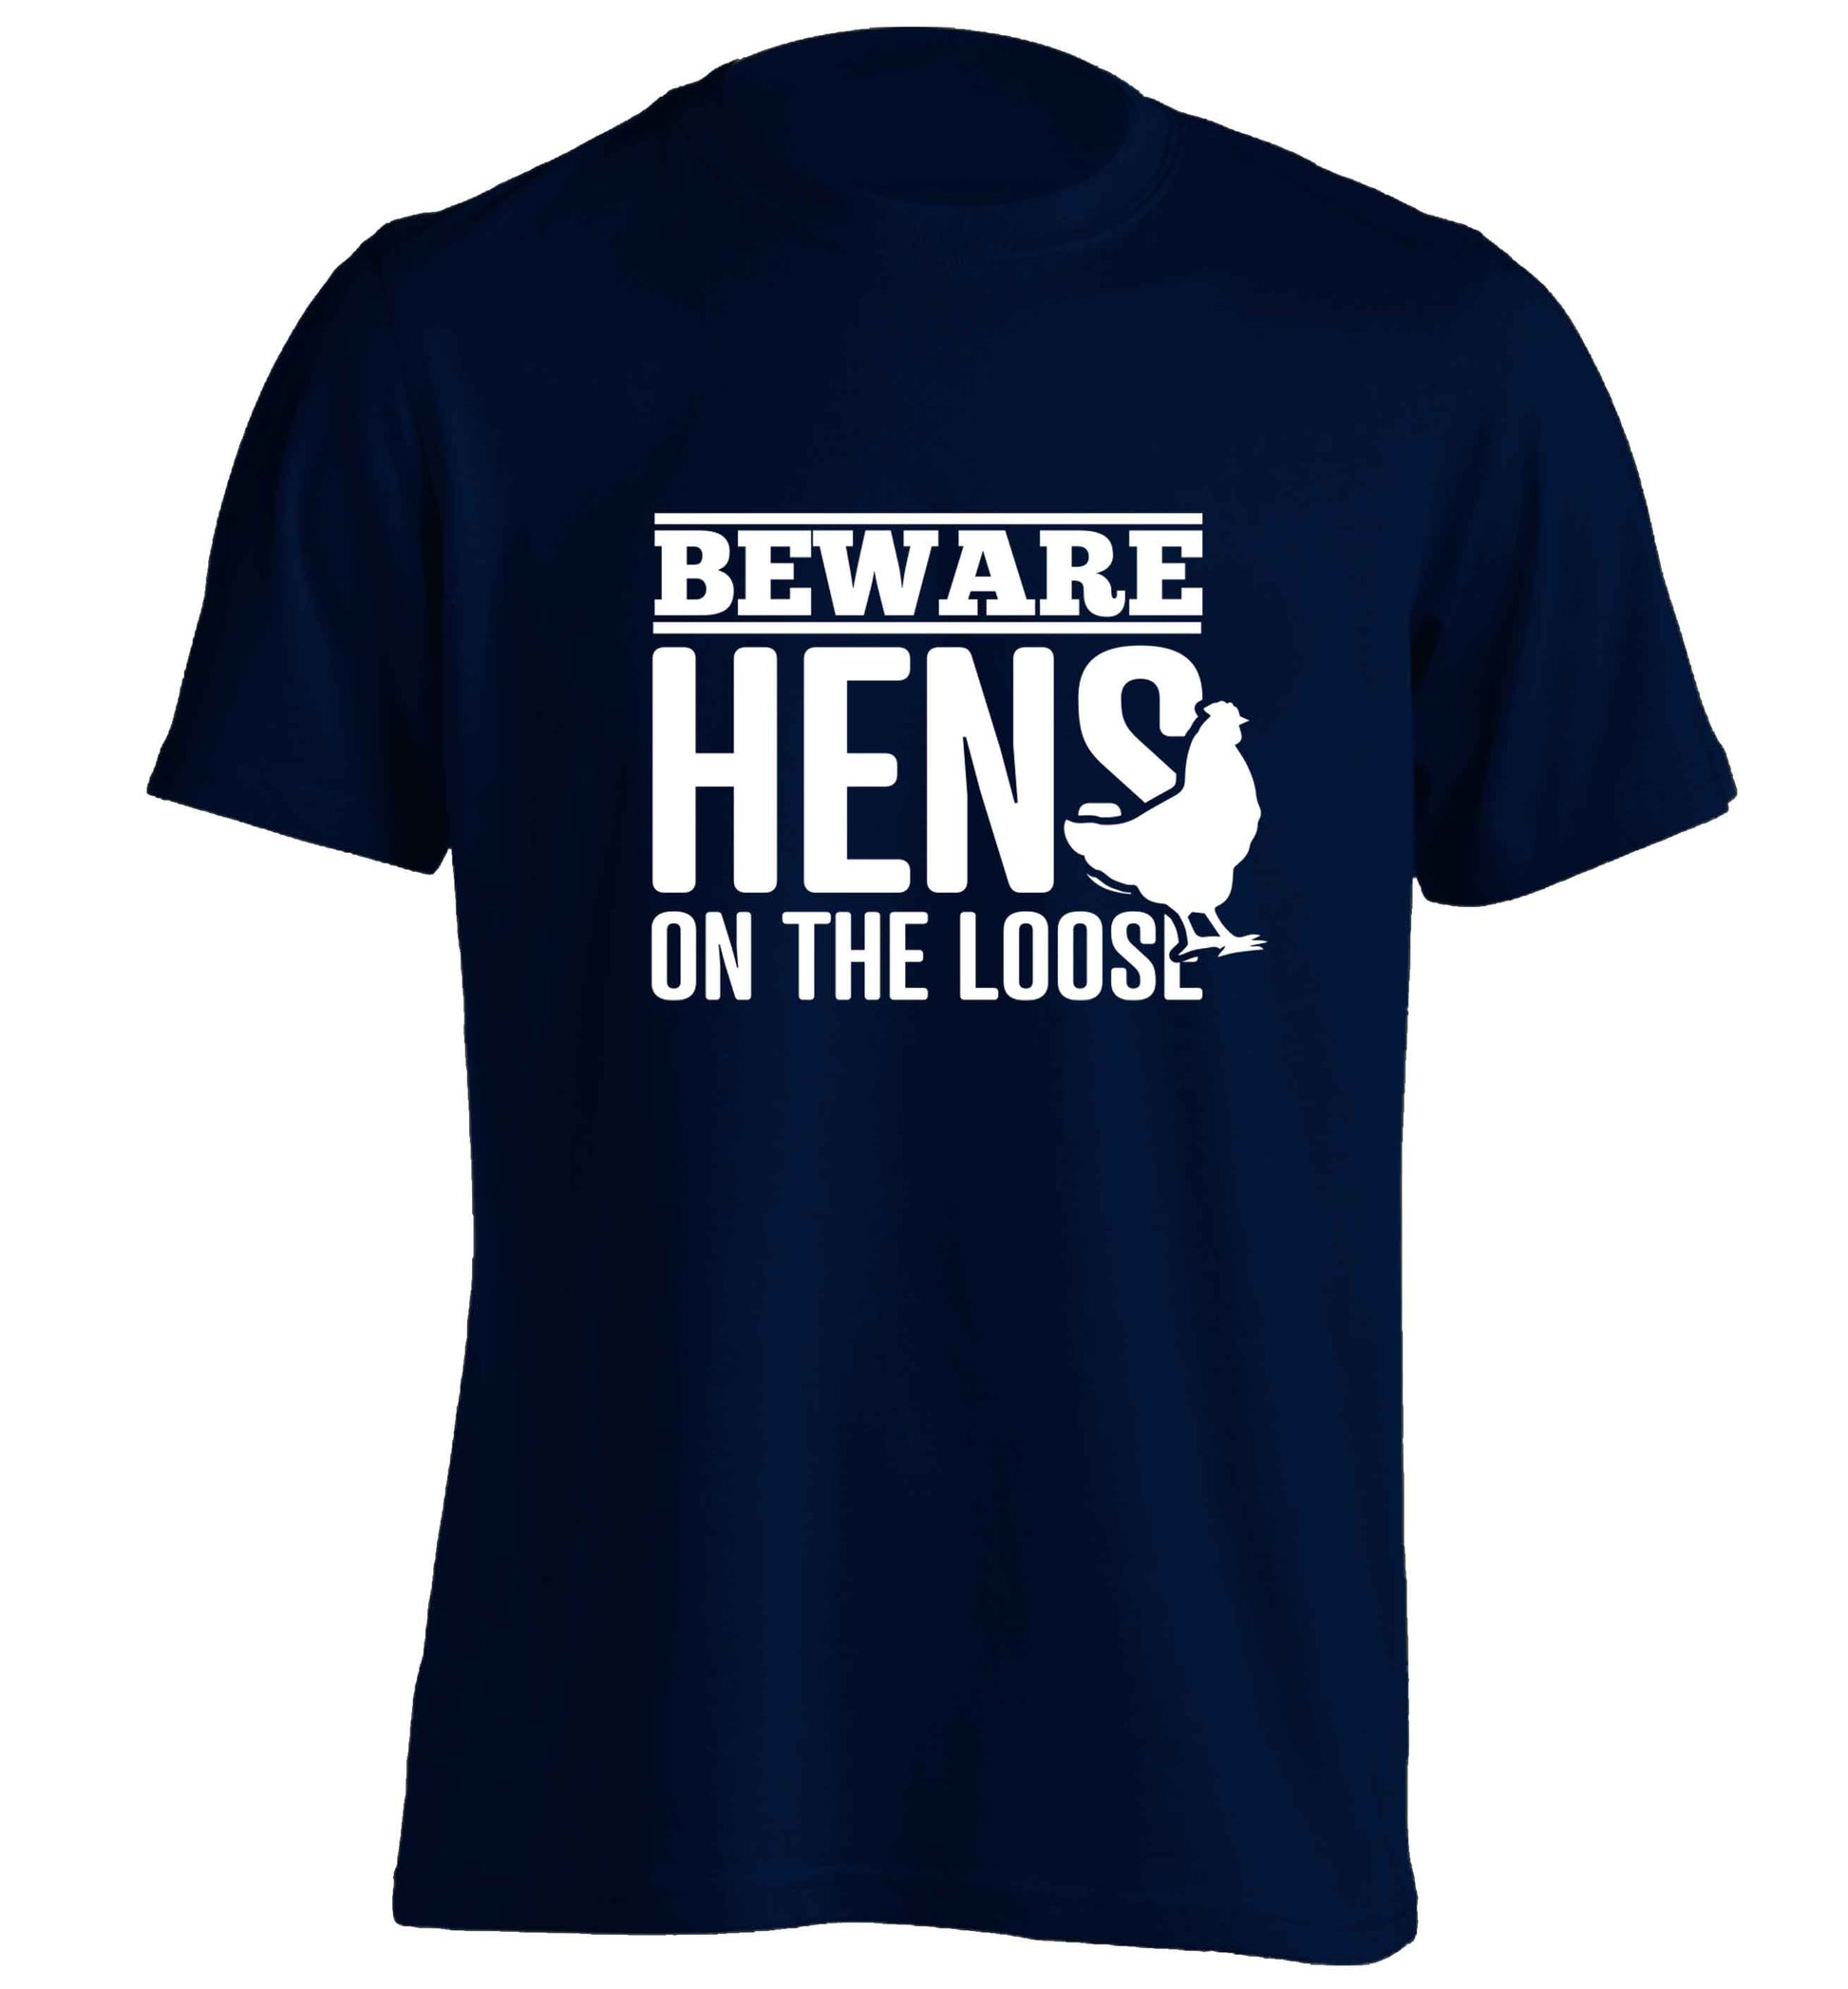 Beware hens on the loose adults unisex navy Tshirt 2XL